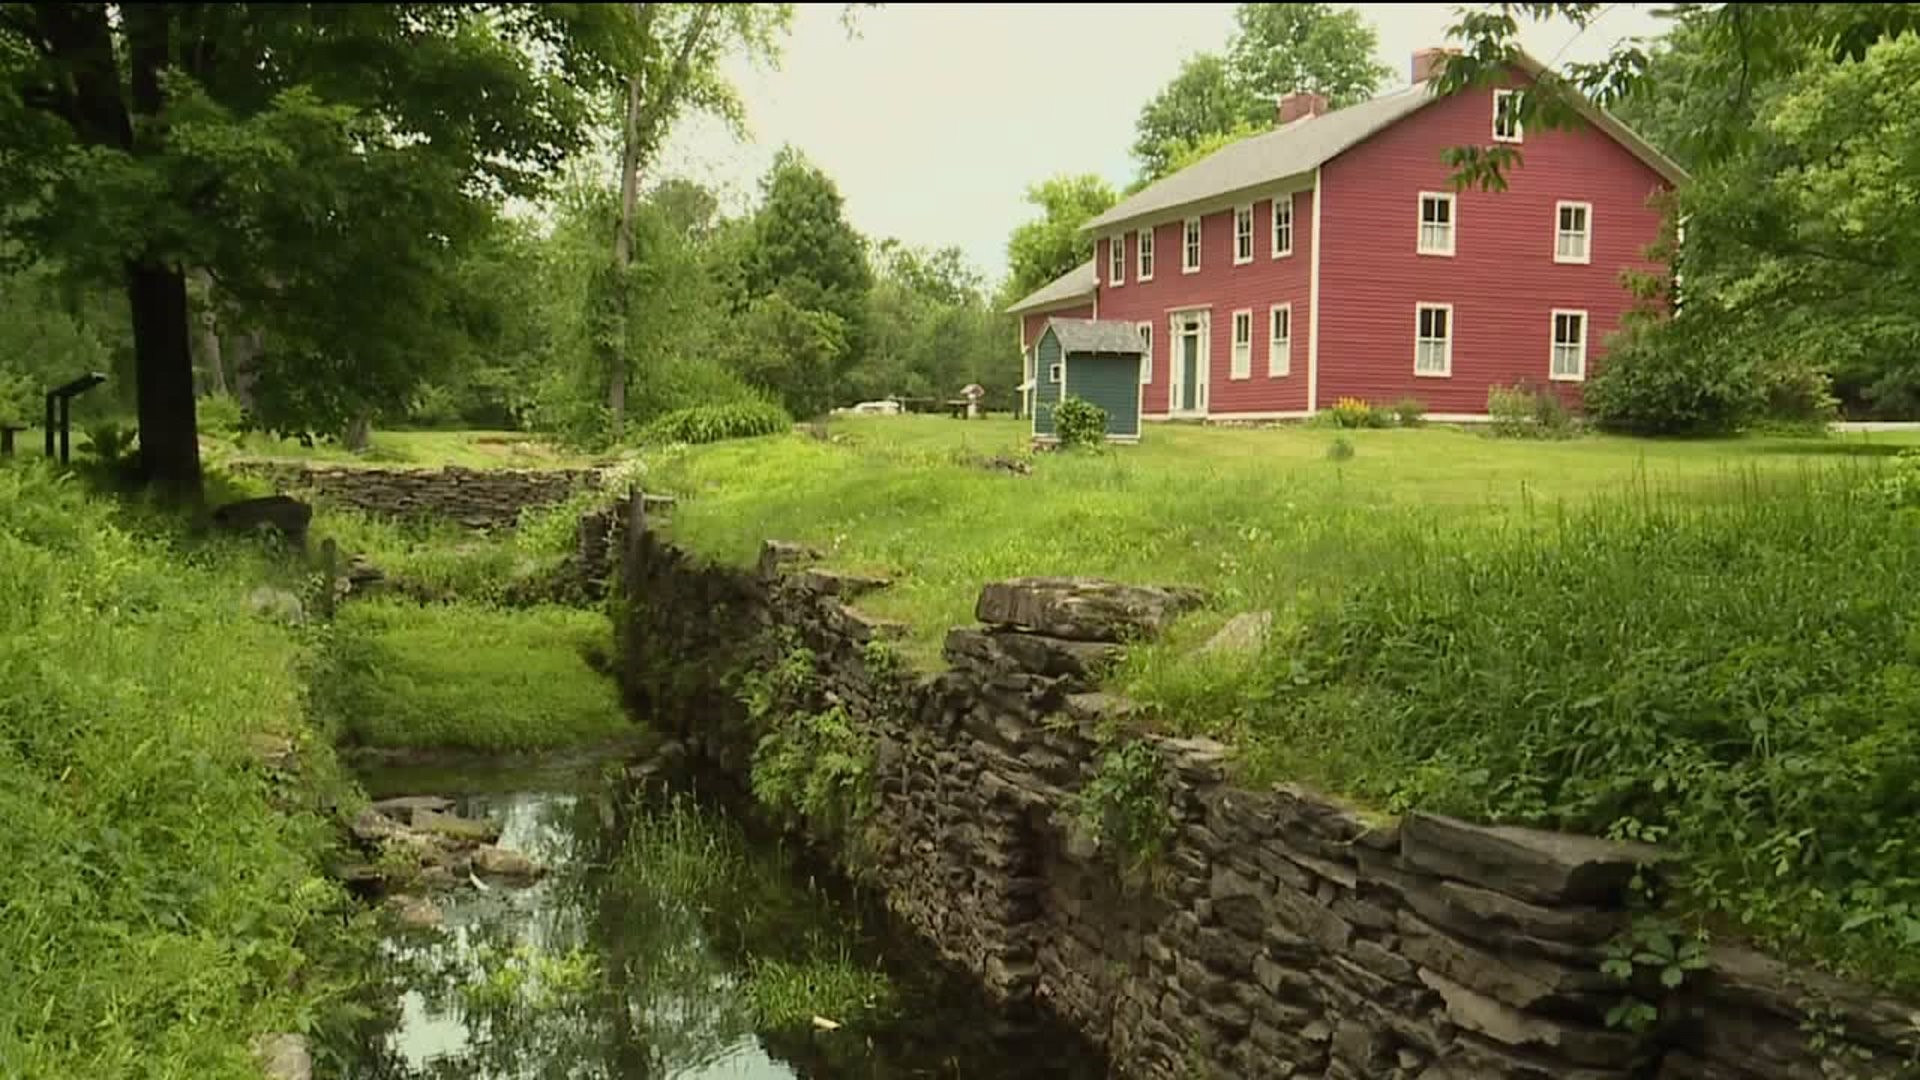 Exploring History and Nature On The Pennsylvania Road